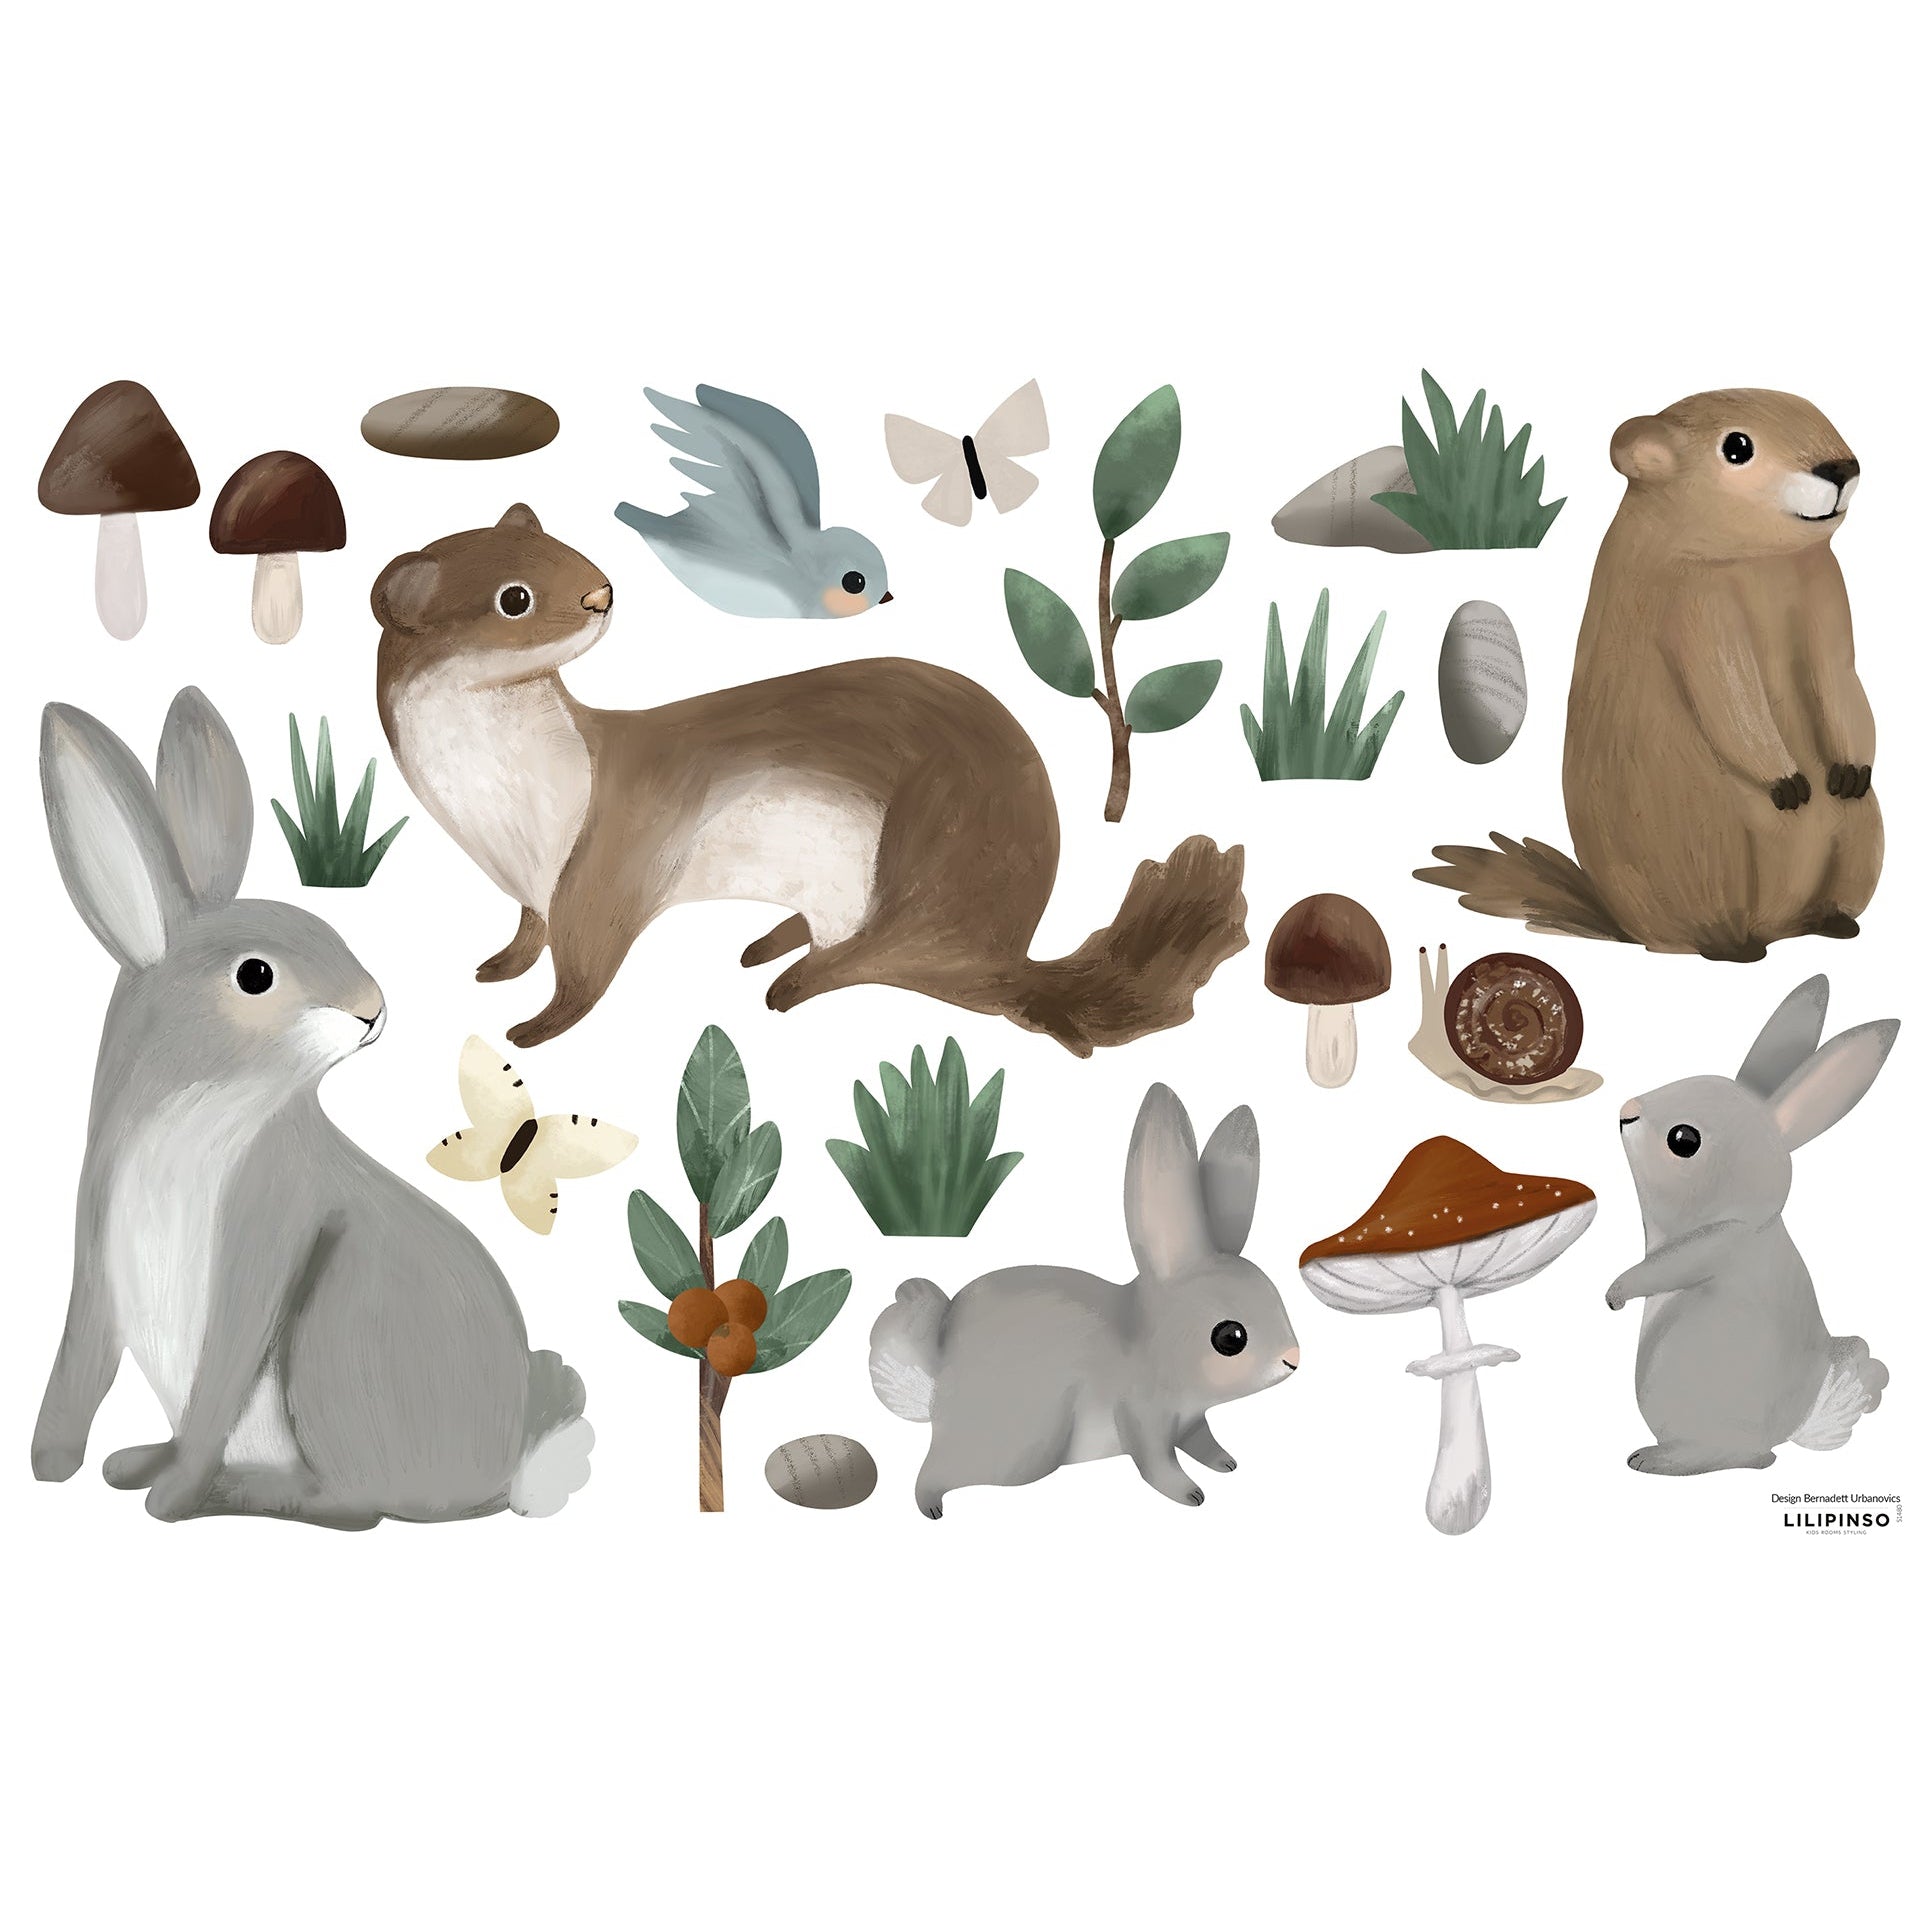 Lilipinso Wall Decals Décor M - Moutain Animals Mix Wall decal